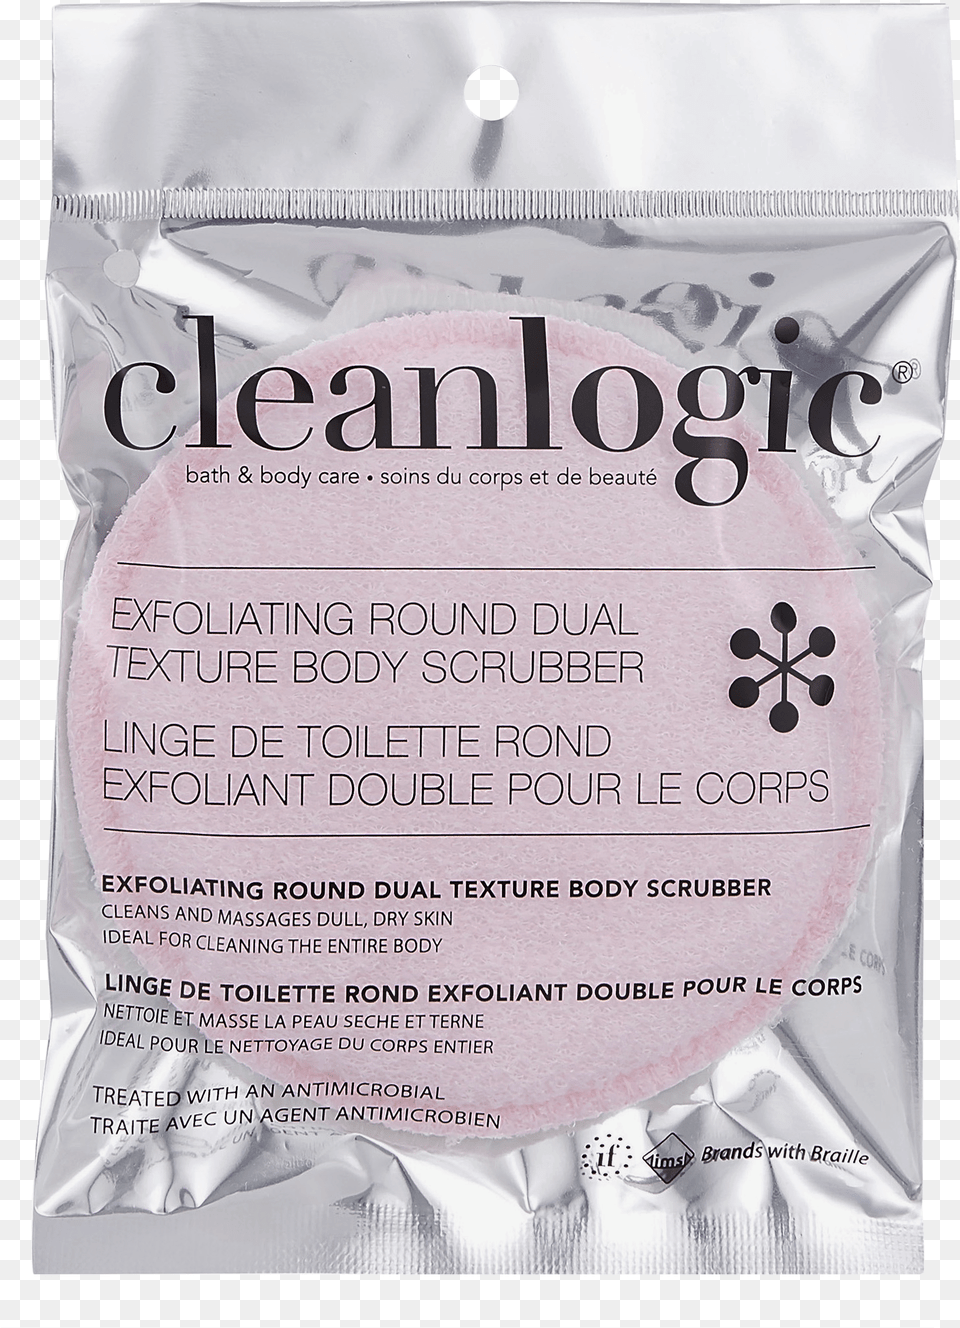 Cleanlogic Exfoliating Body Scrubber Png Image